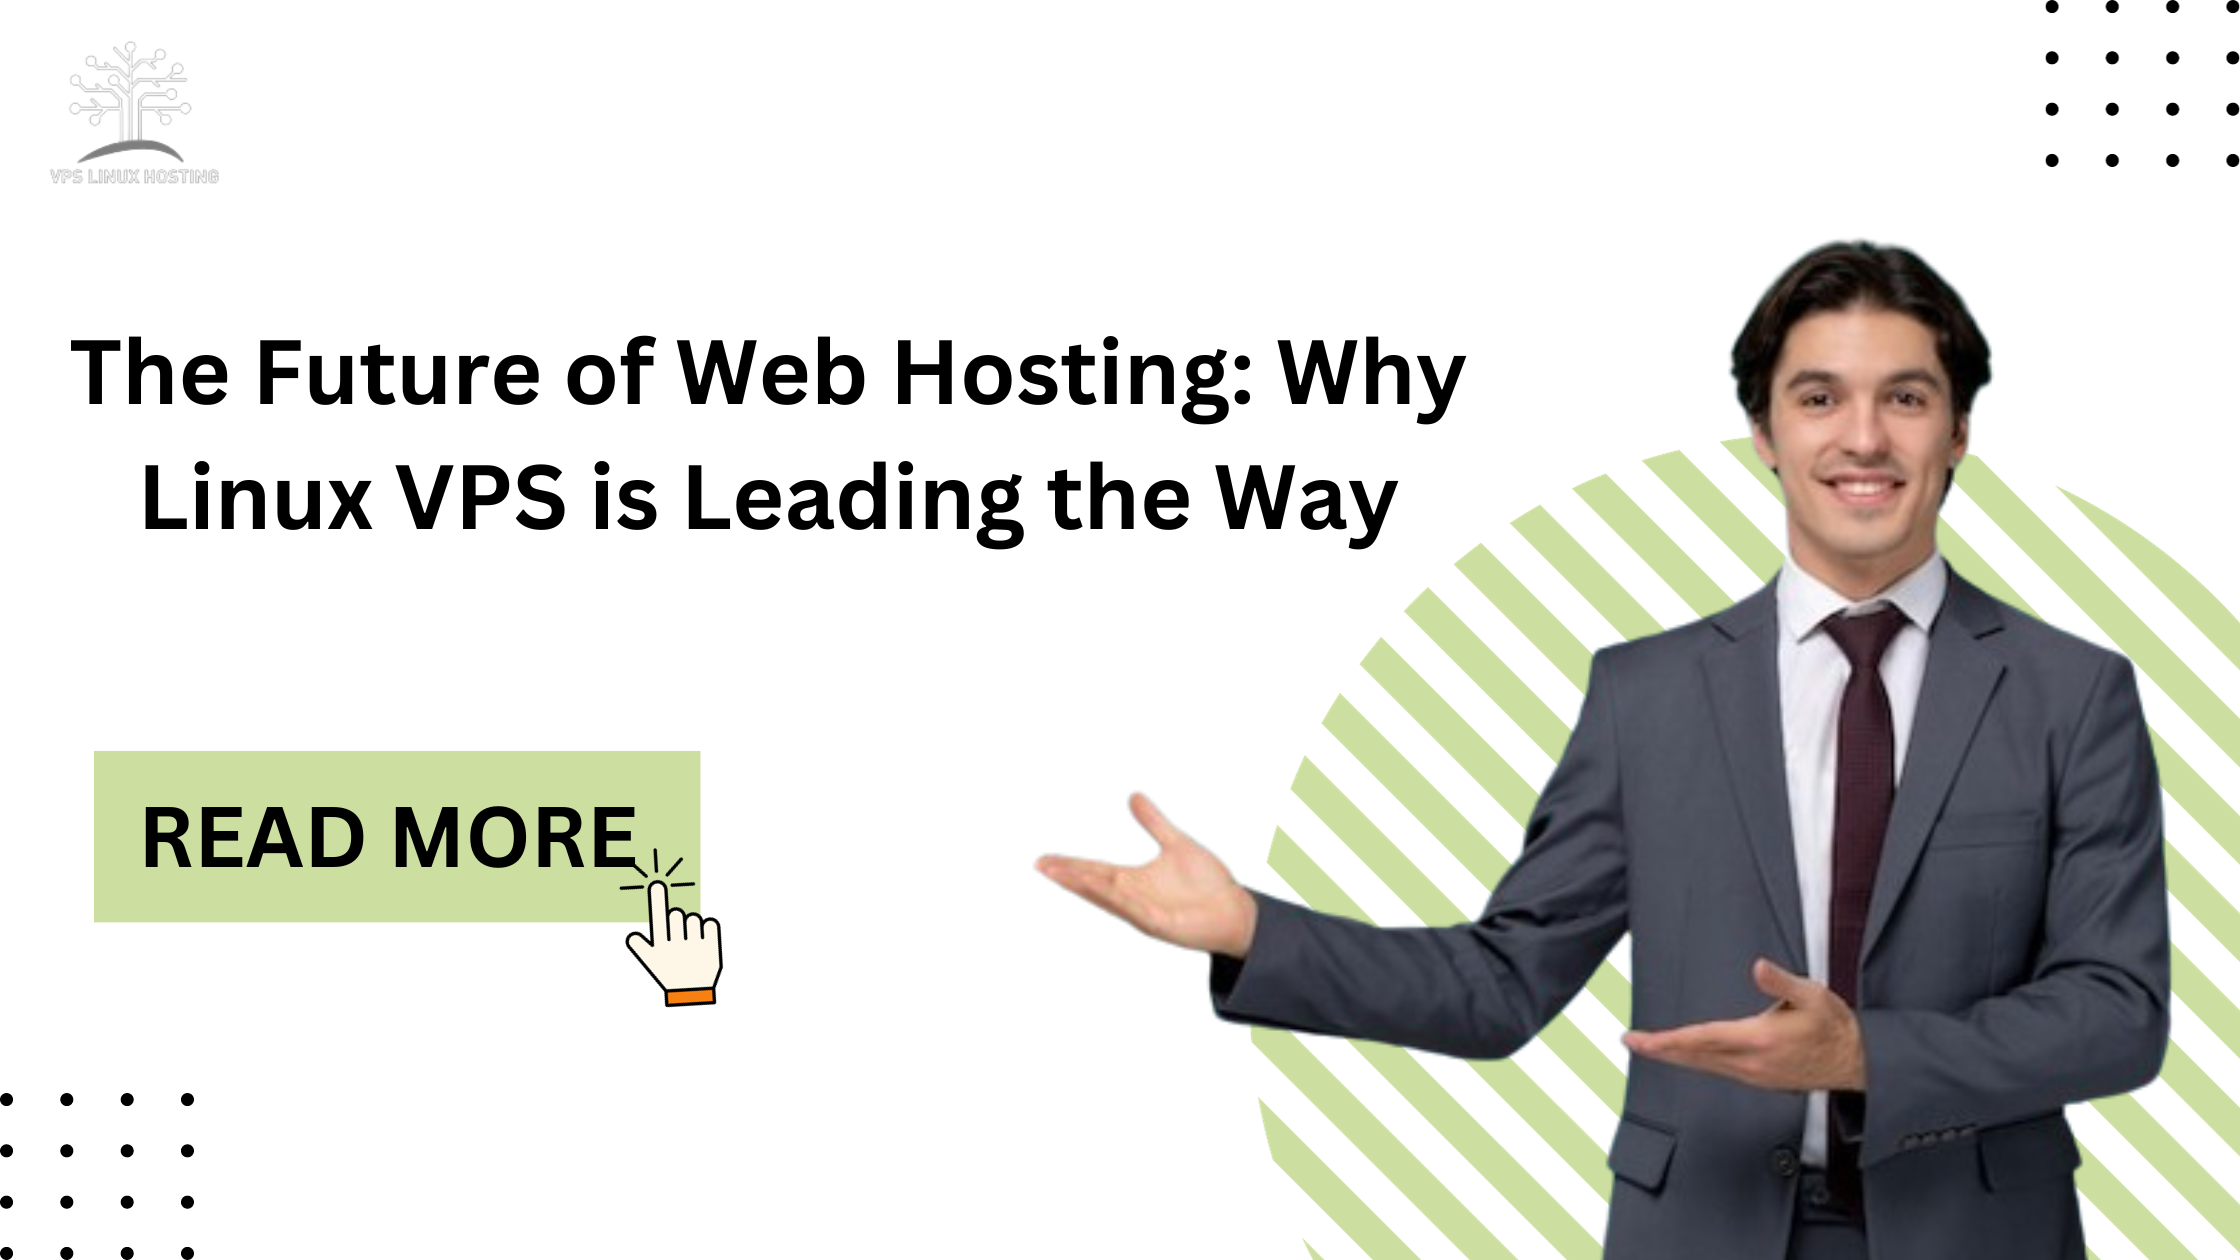 The Future of Web Hosting: Why Linux VPS is Leading the Way